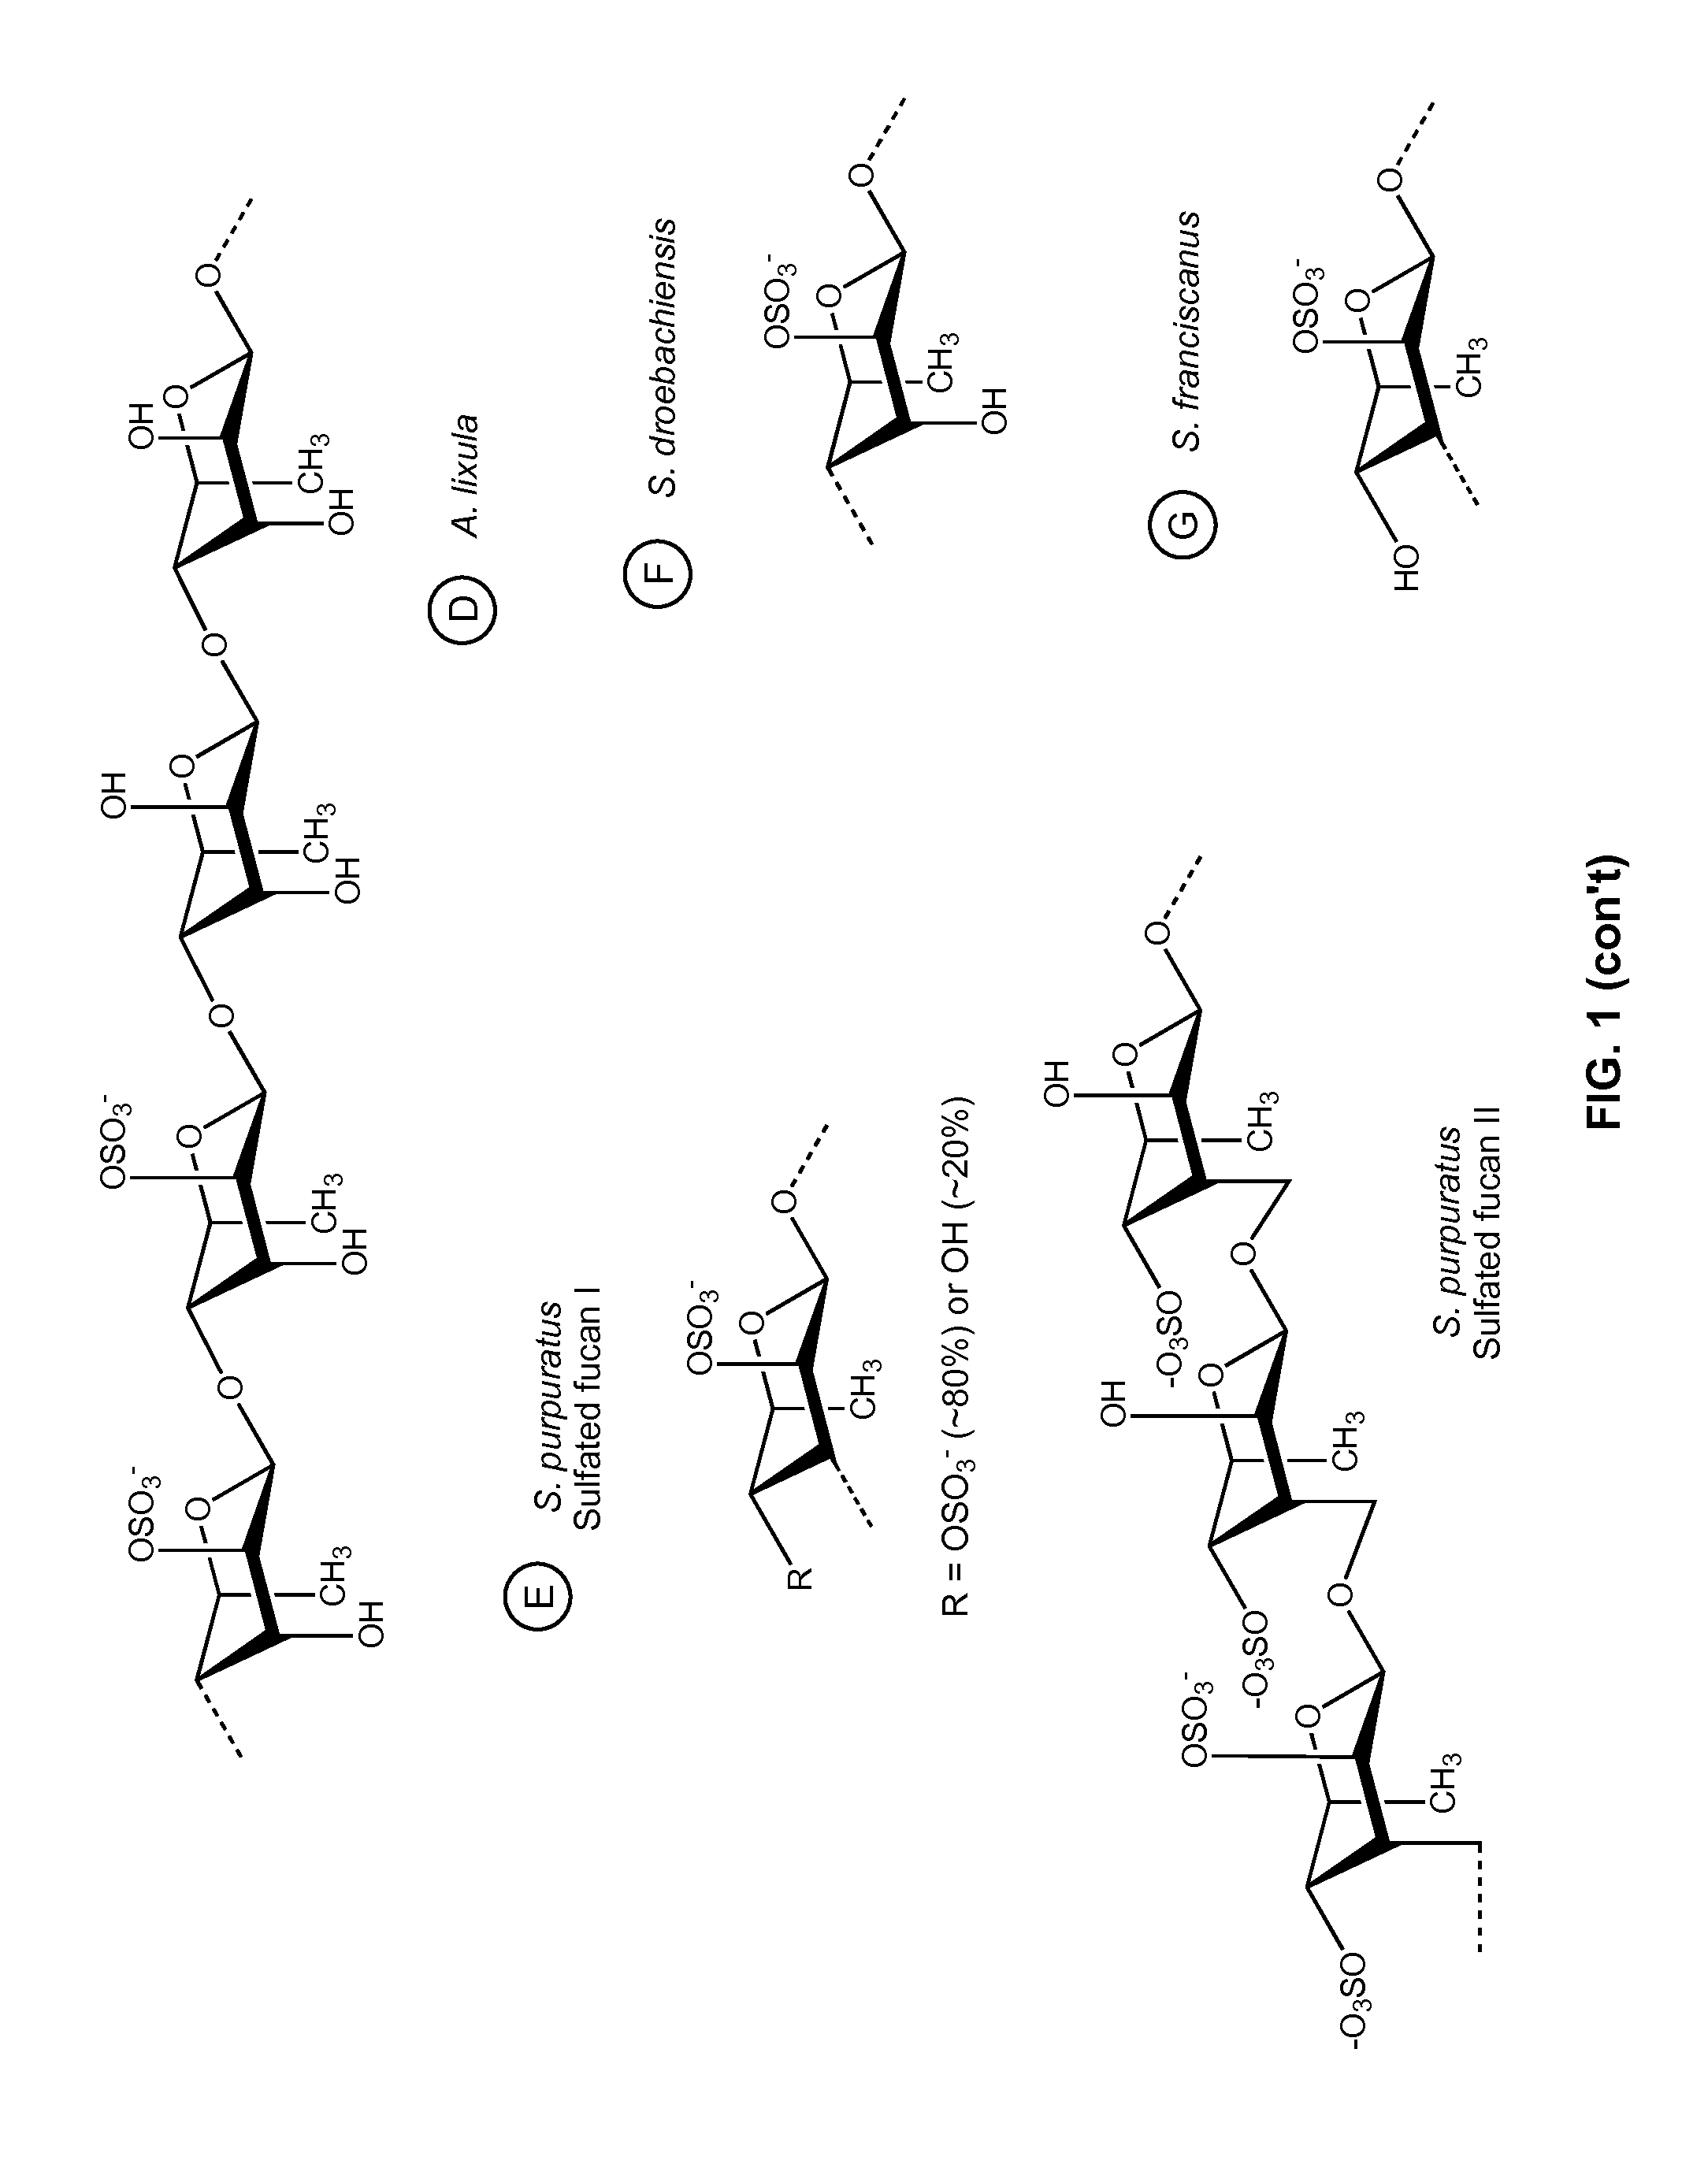 Therapeutic Sulfated Polysaccharides, Compositions Thereof, and Methods for Treating Patients